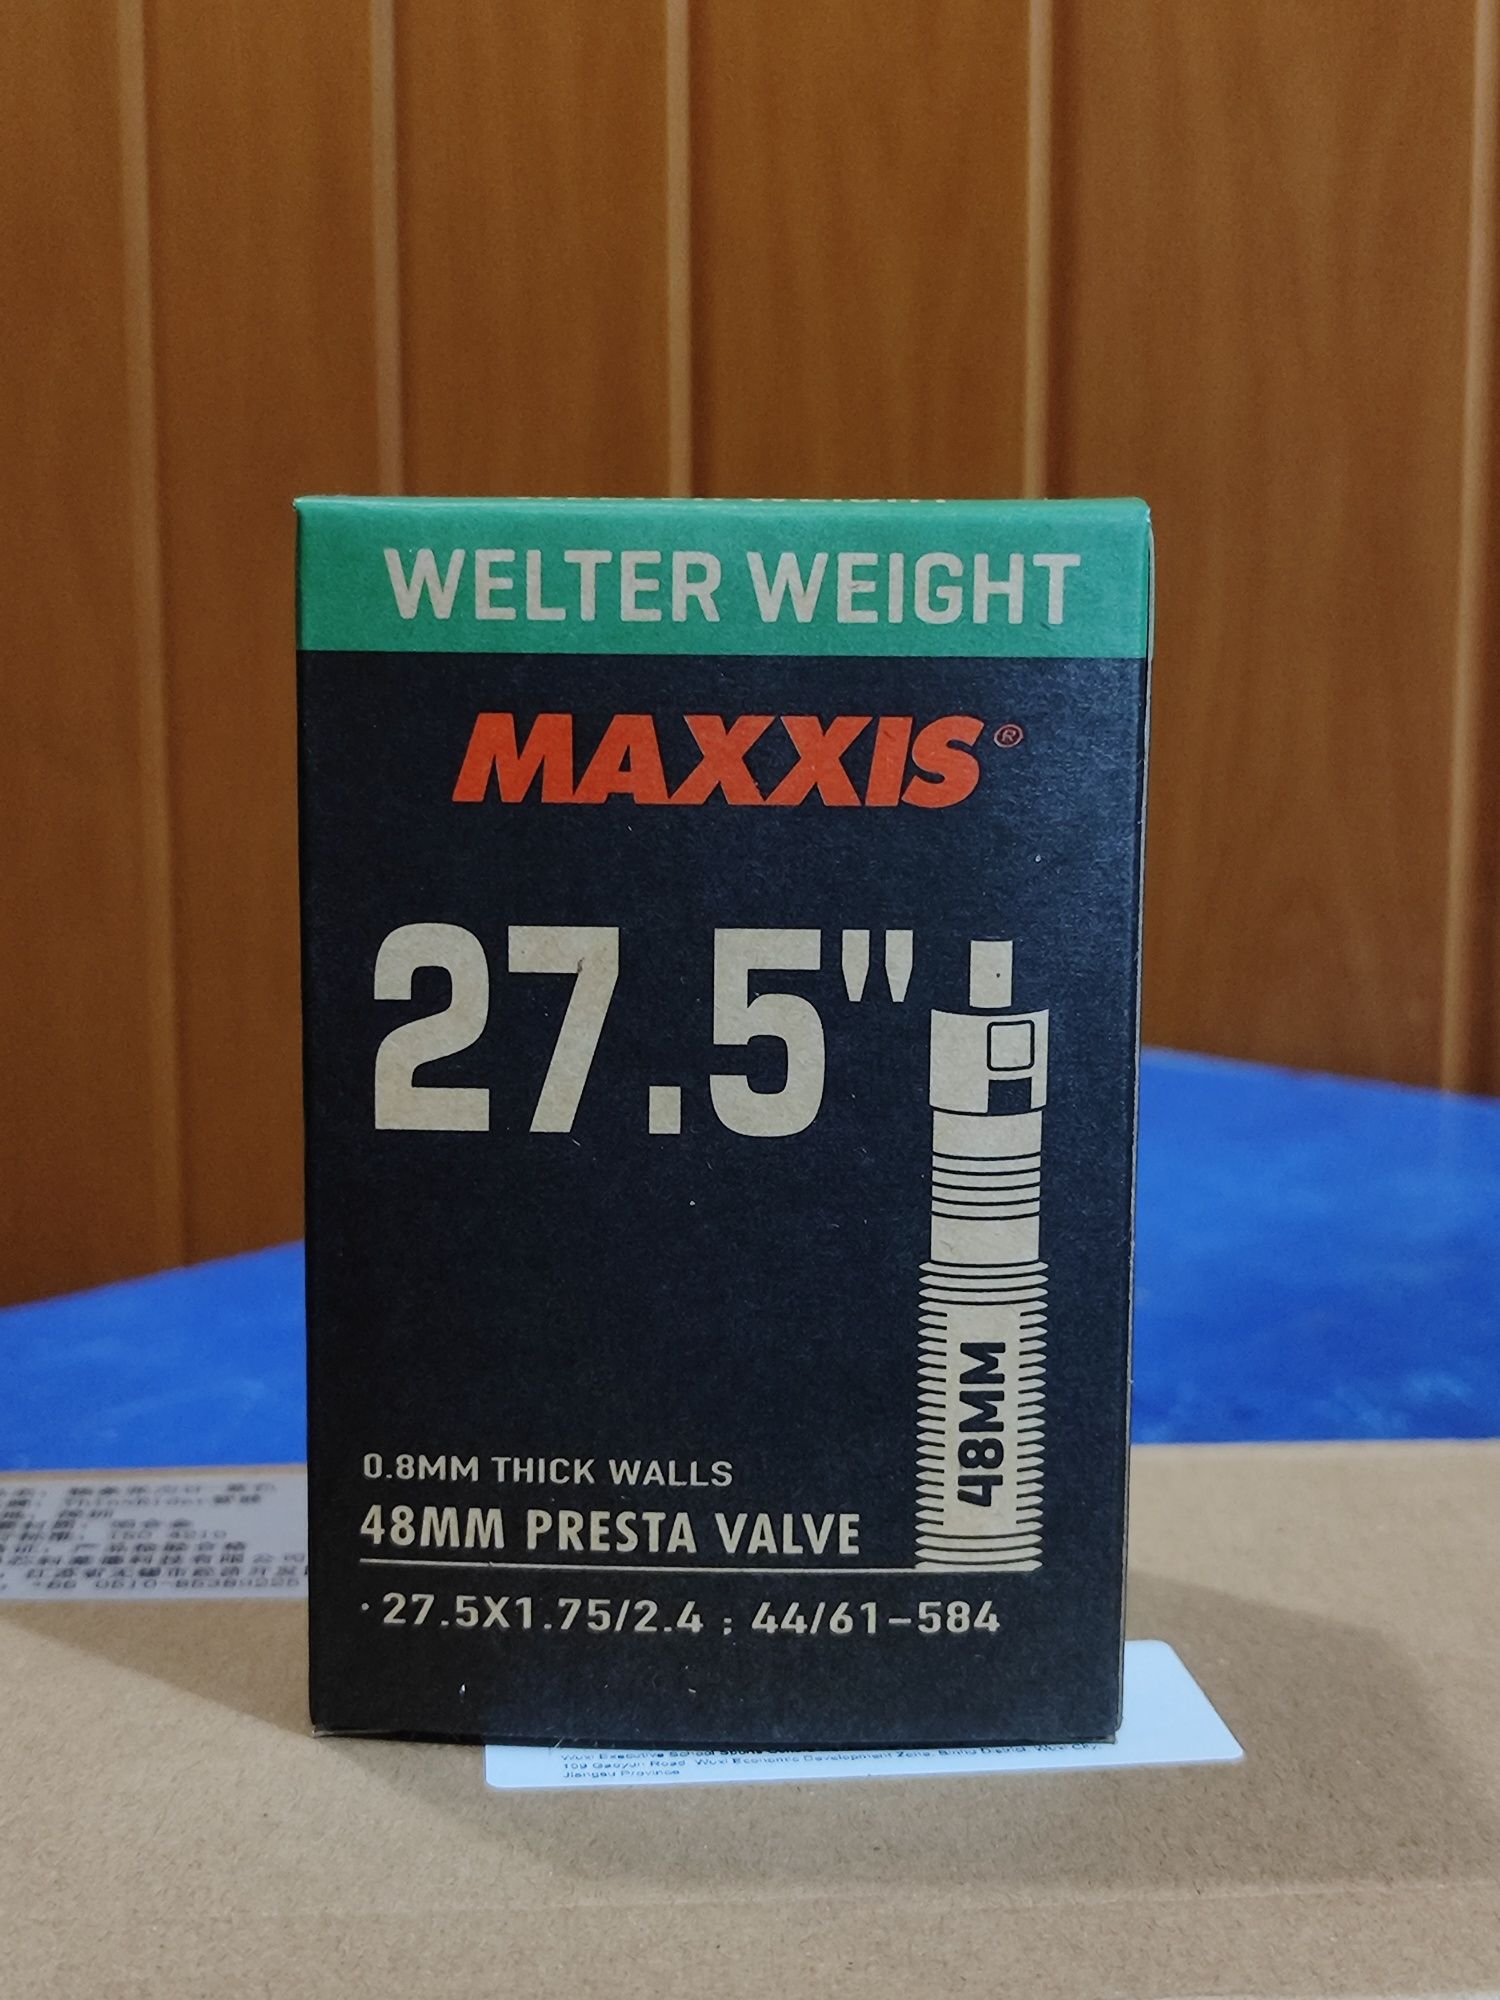 Камера Maxxis Welter Weight 27.5”x1.75-2.4” (44/61-584) FV 48мм